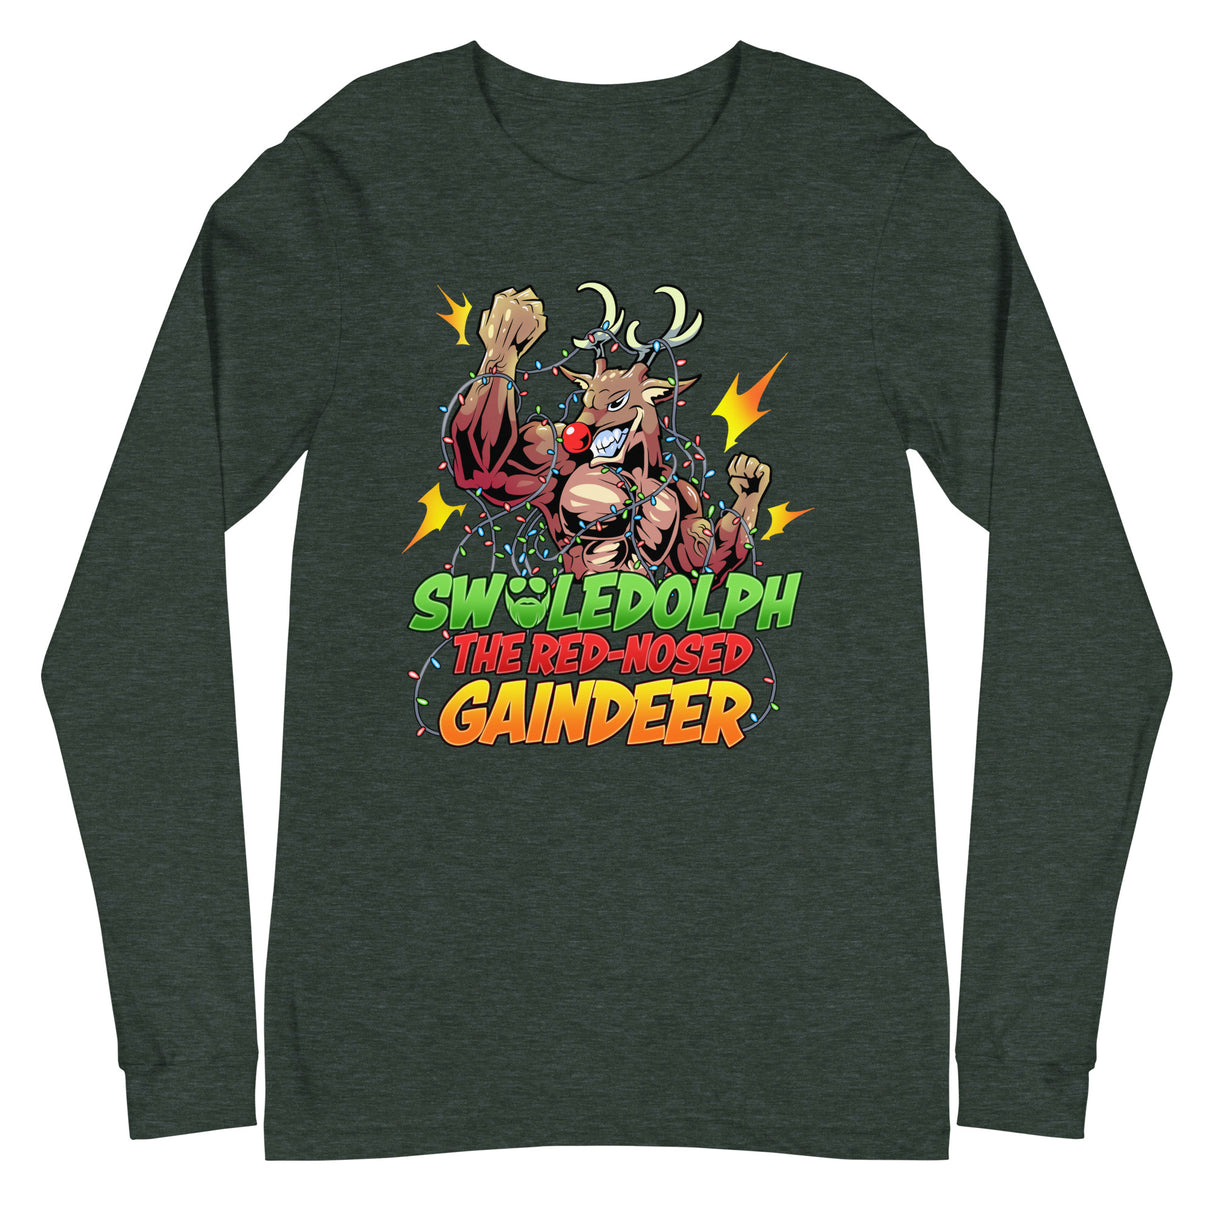 Swoledolph The Red-Nosed Gaindeer Long Sleeve T-Shirt